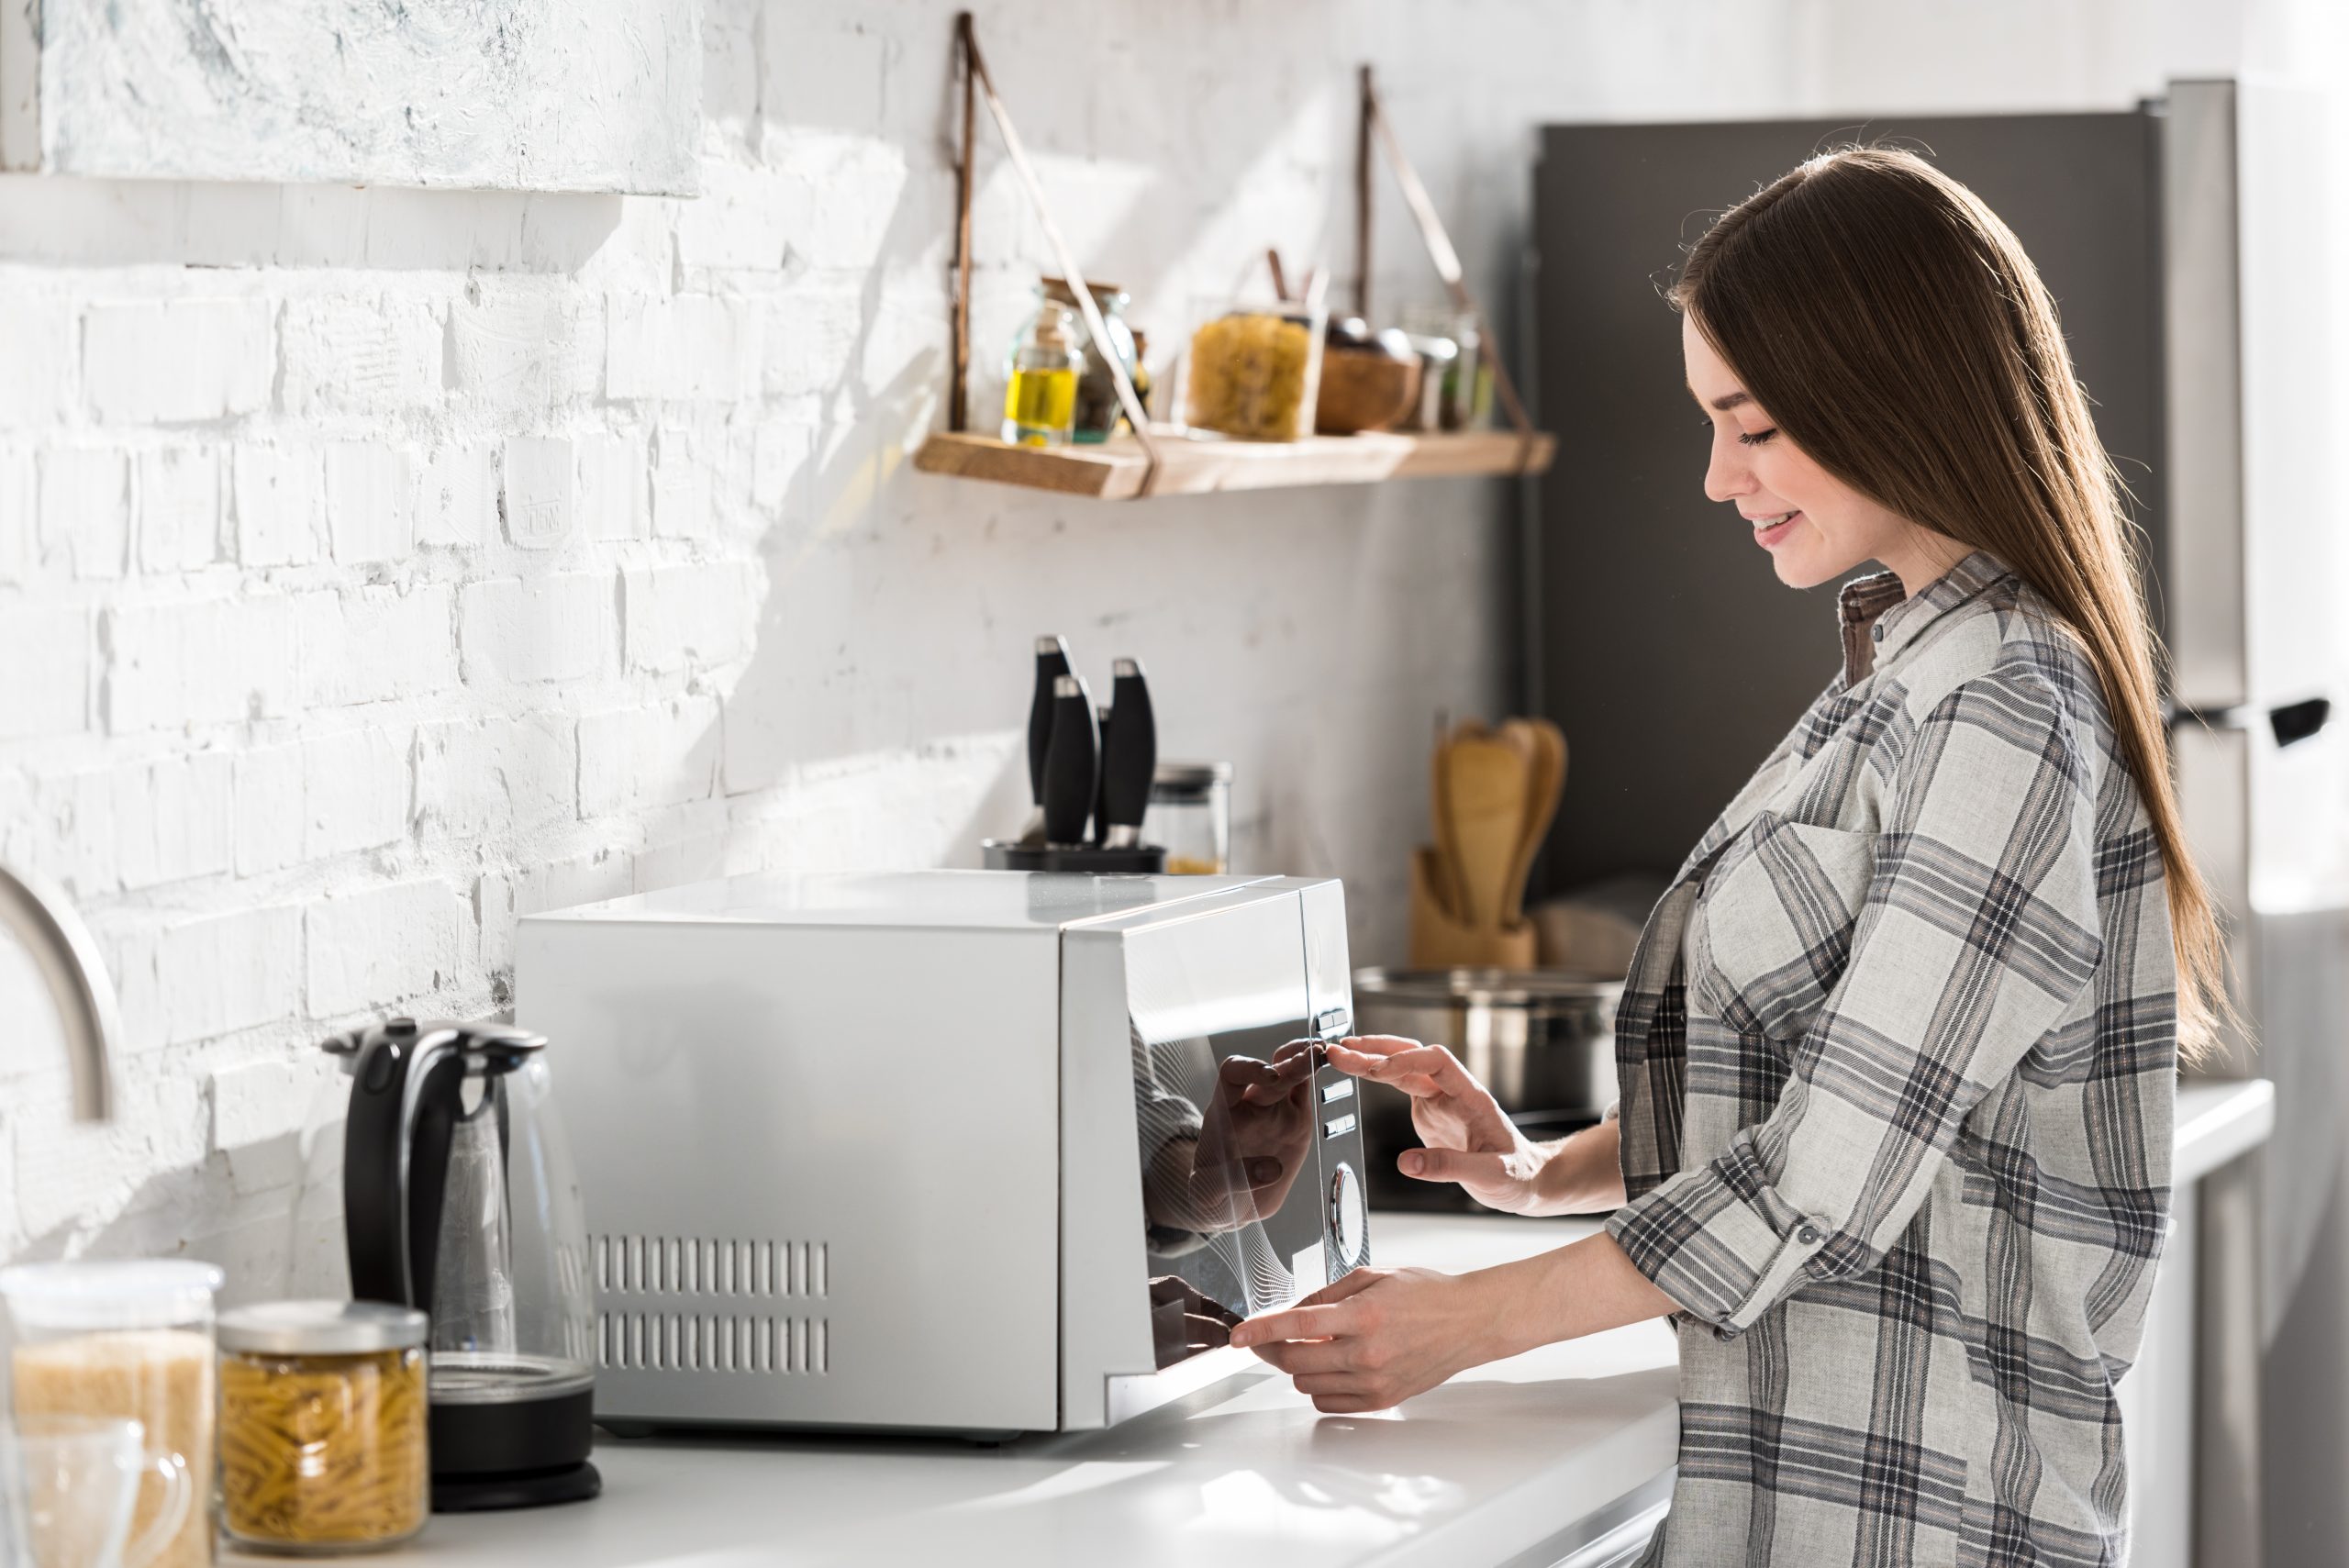 8 smart uses for microwaves other than heating